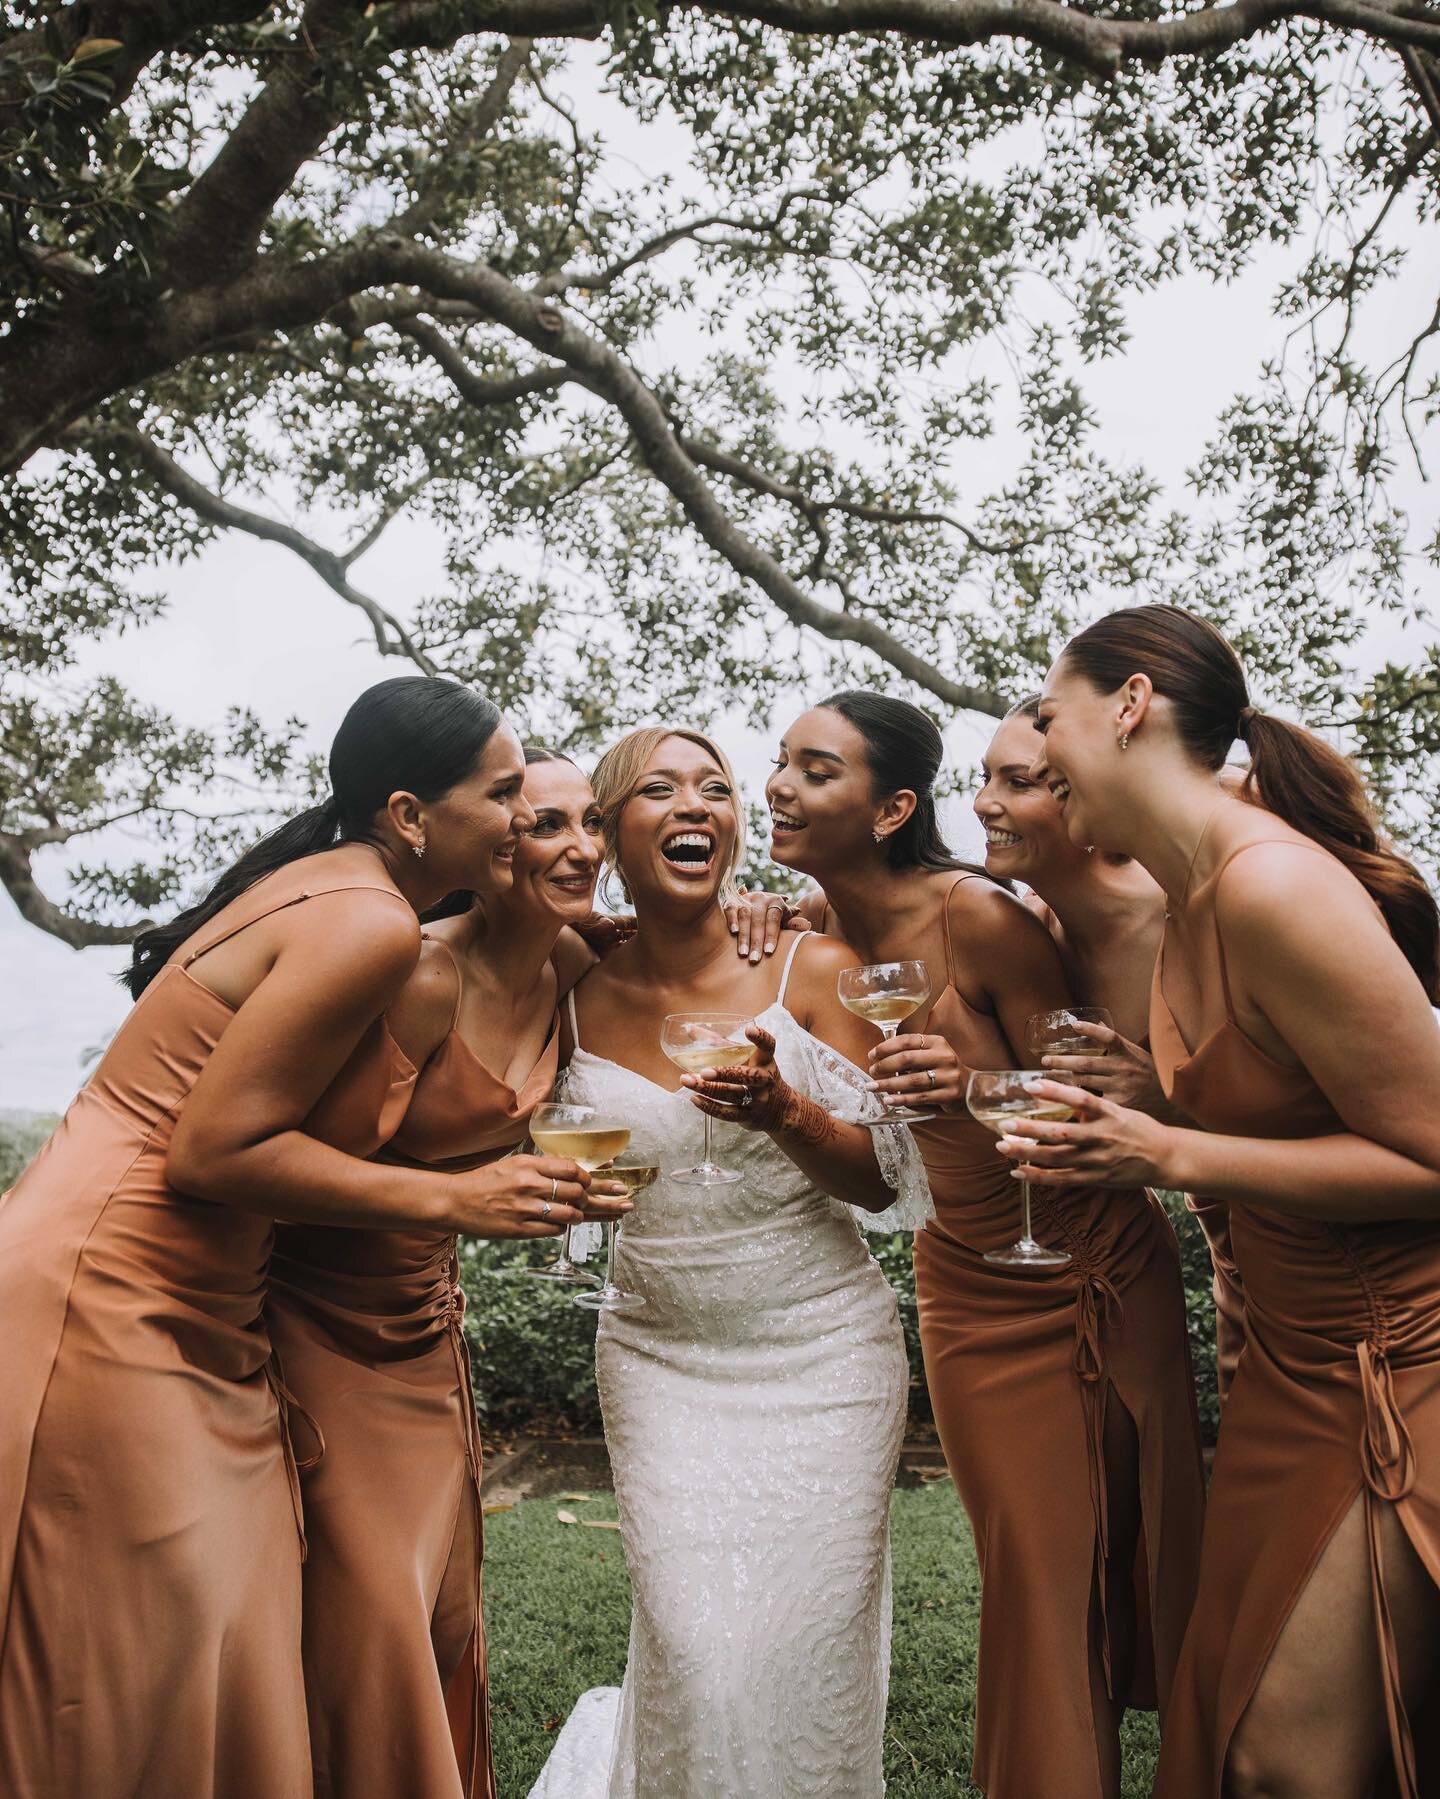 Champagne and belly laughs with Naz&rsquo;s incredible bride tribe.

~

Photography: @wills.weddings
Venue:&nbsp;@figtreerestaurant
Hair &amp; Makeup: @luanacoscia
Florals:&nbsp;@flwr_studio 
Entertainment: @bollywoodsisters
Cake: @justaddflower 
Dre